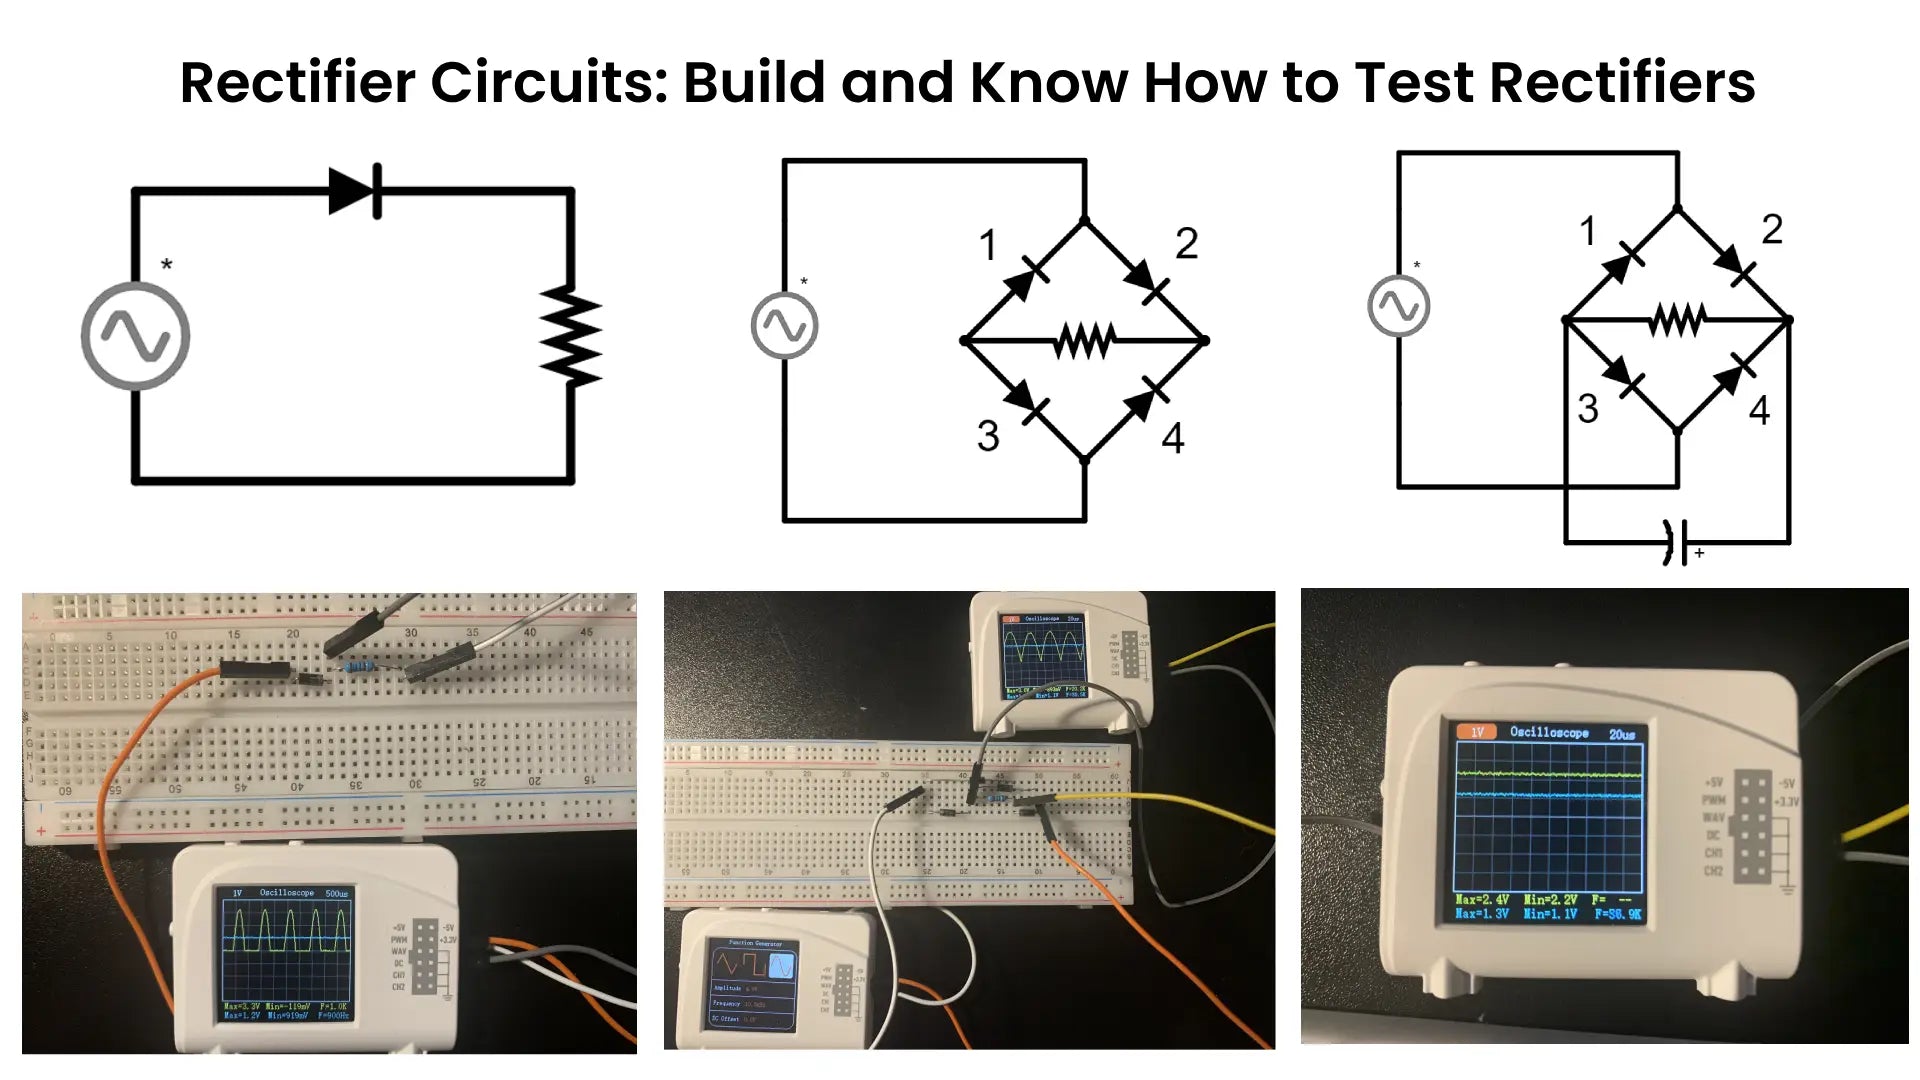 Rectifier circuits : Build and Know How to Test Rectifiers